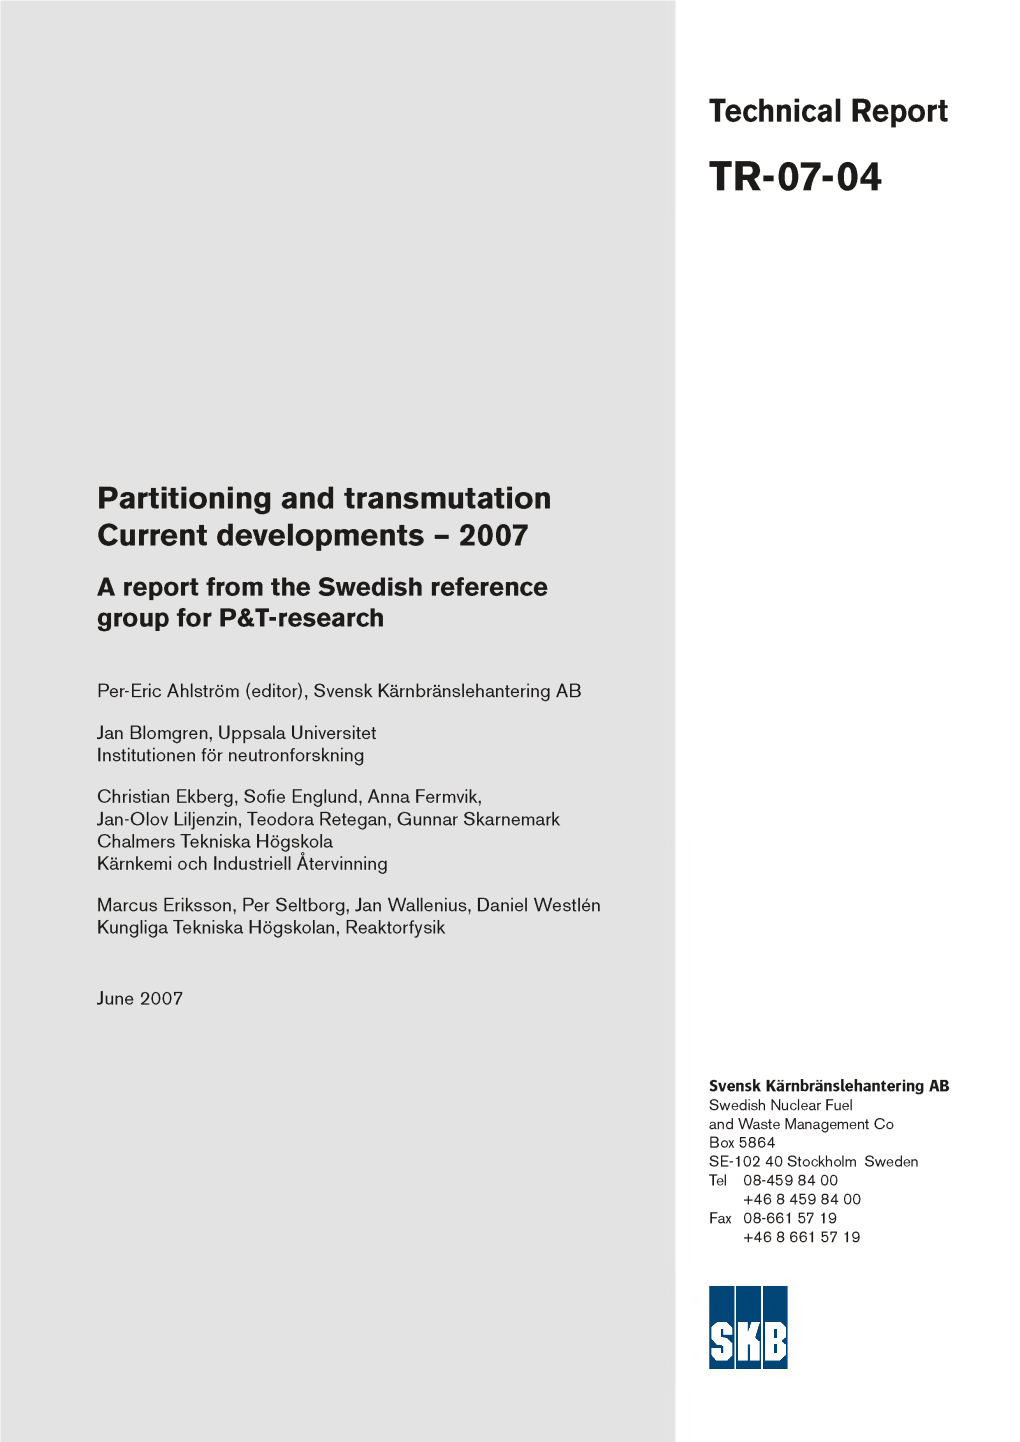 2007 a Report from the Swedish Reference Group for P&T-Research